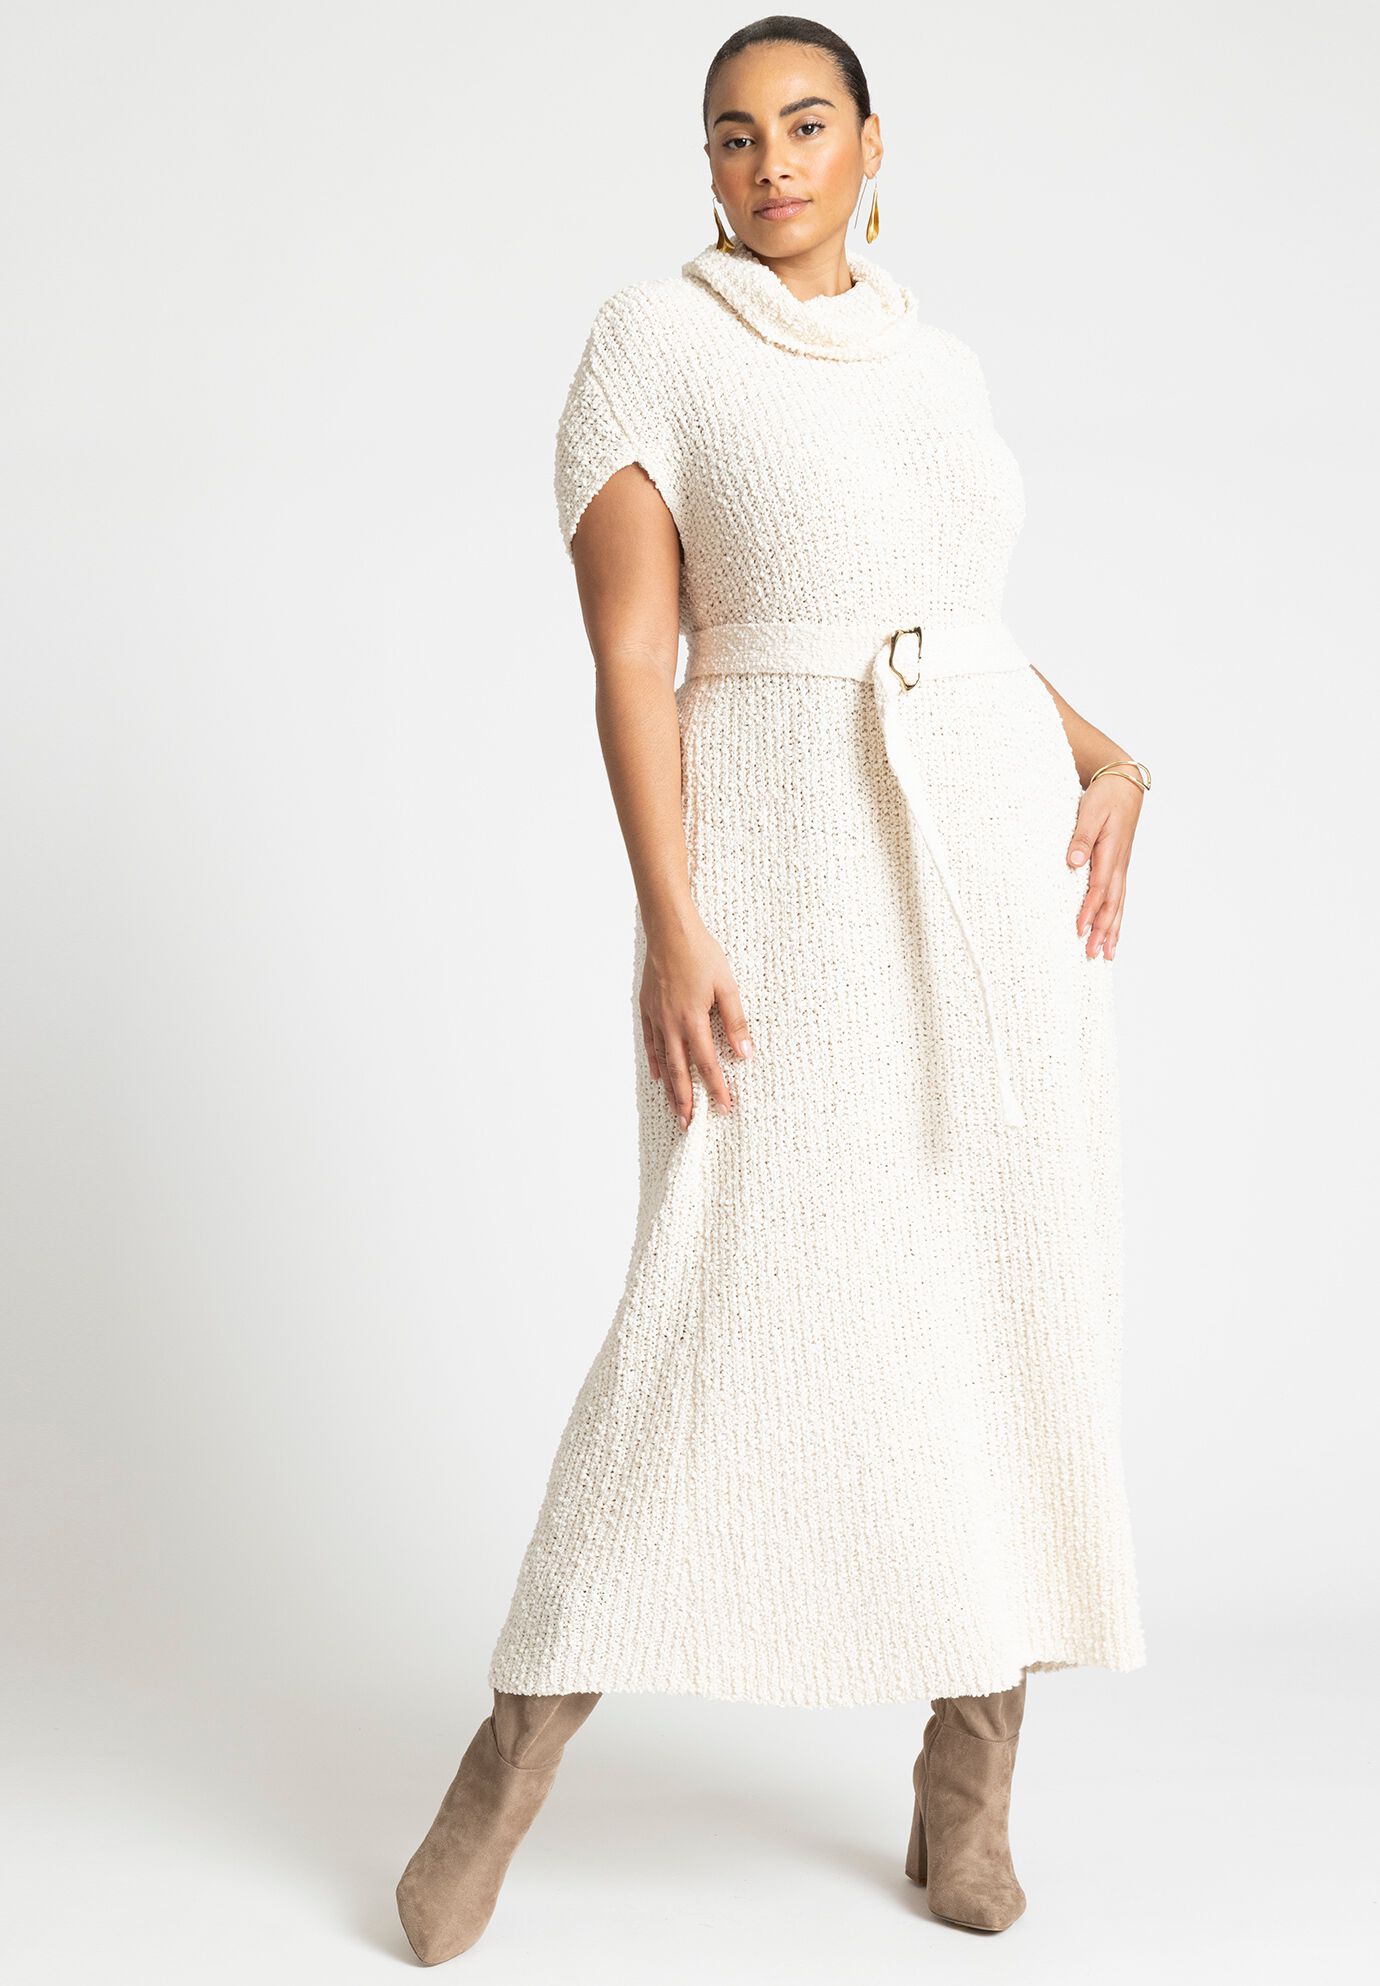 Turtleneck Polyester Sweater Dress by Eloquii